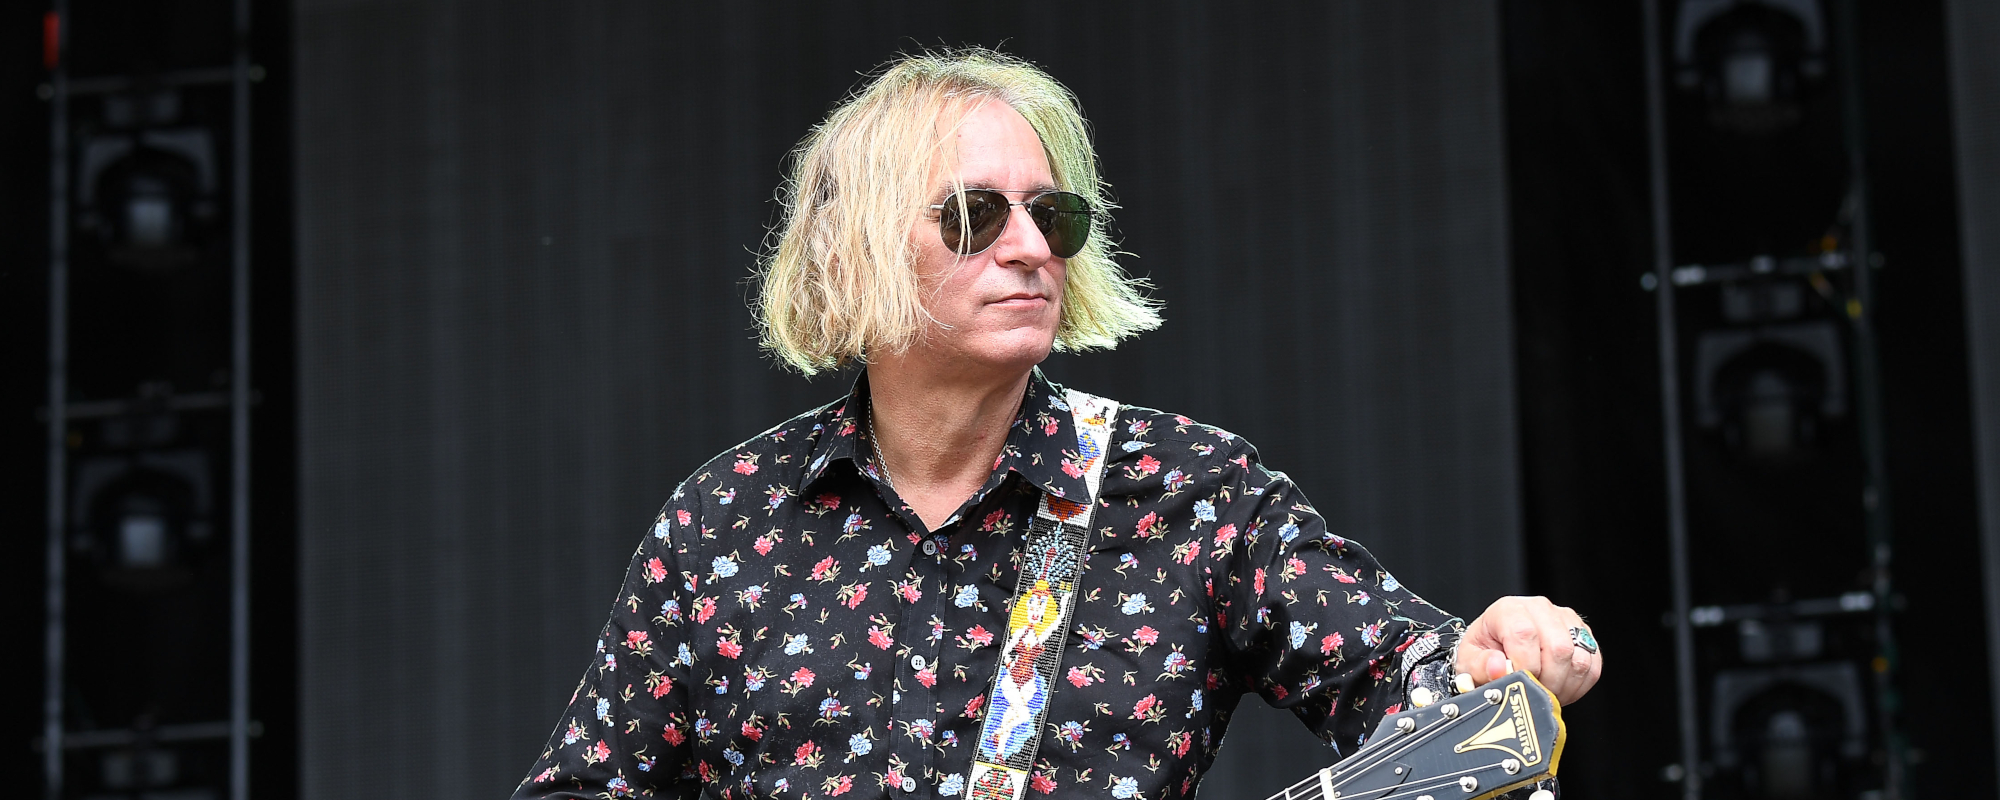 3 Songs You Didn’t Know R.E.M.’s Peter Buck Wrote for Other Artists